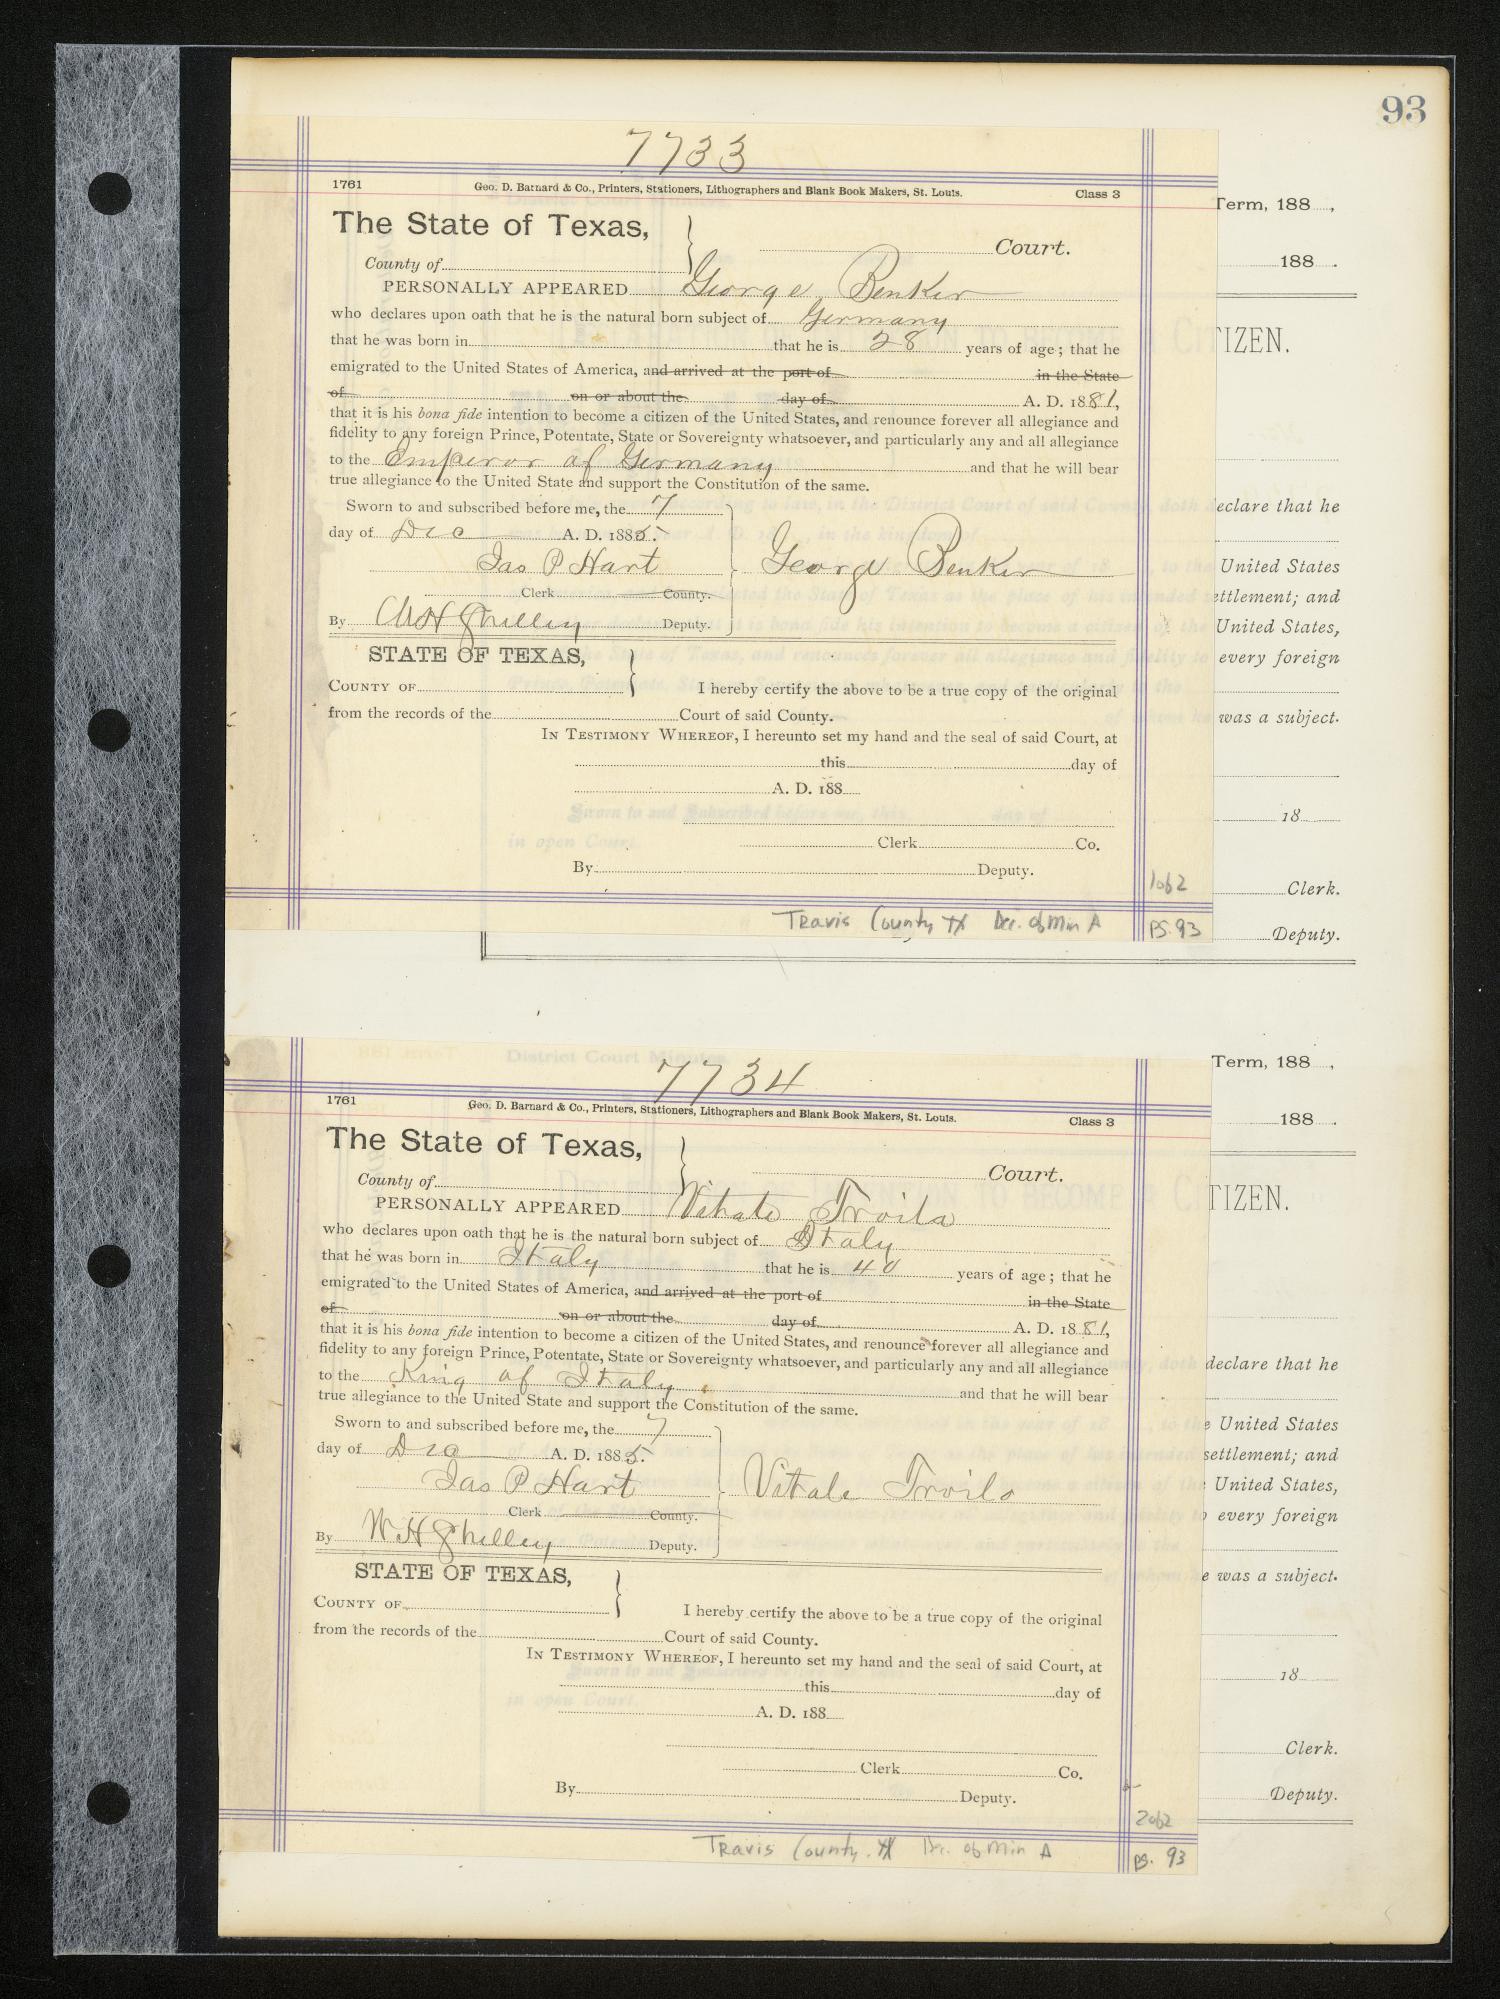 Travis County Naturalization Records: Declaration Minutes A, pages 1-208
                                                
                                                    93
                                                